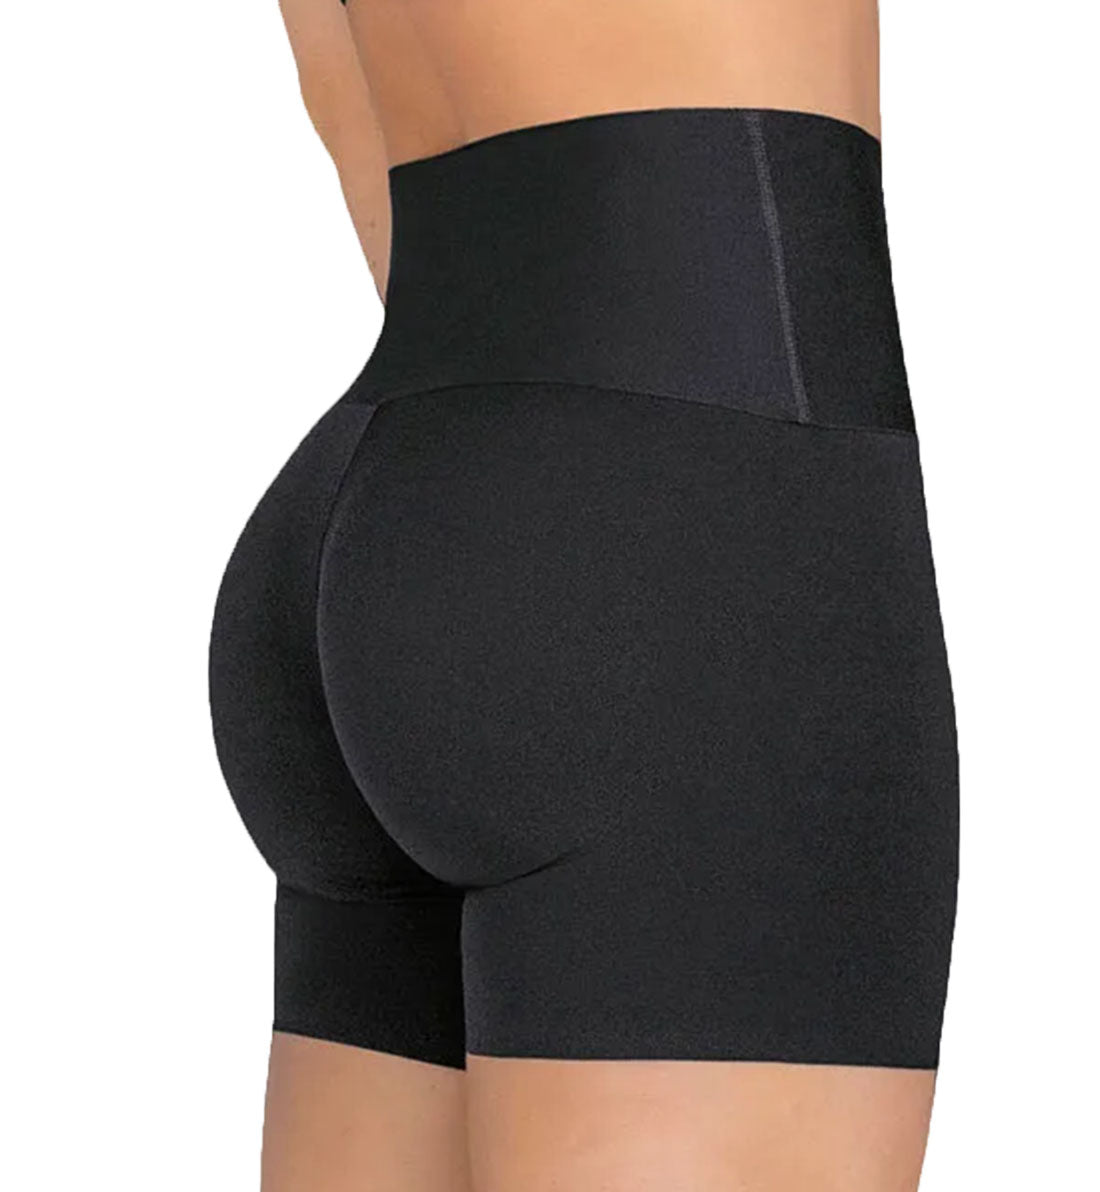 Leonisa Stay-in-Place High Waist Seamless Slip Short (012970),Small,Black - Black,Small